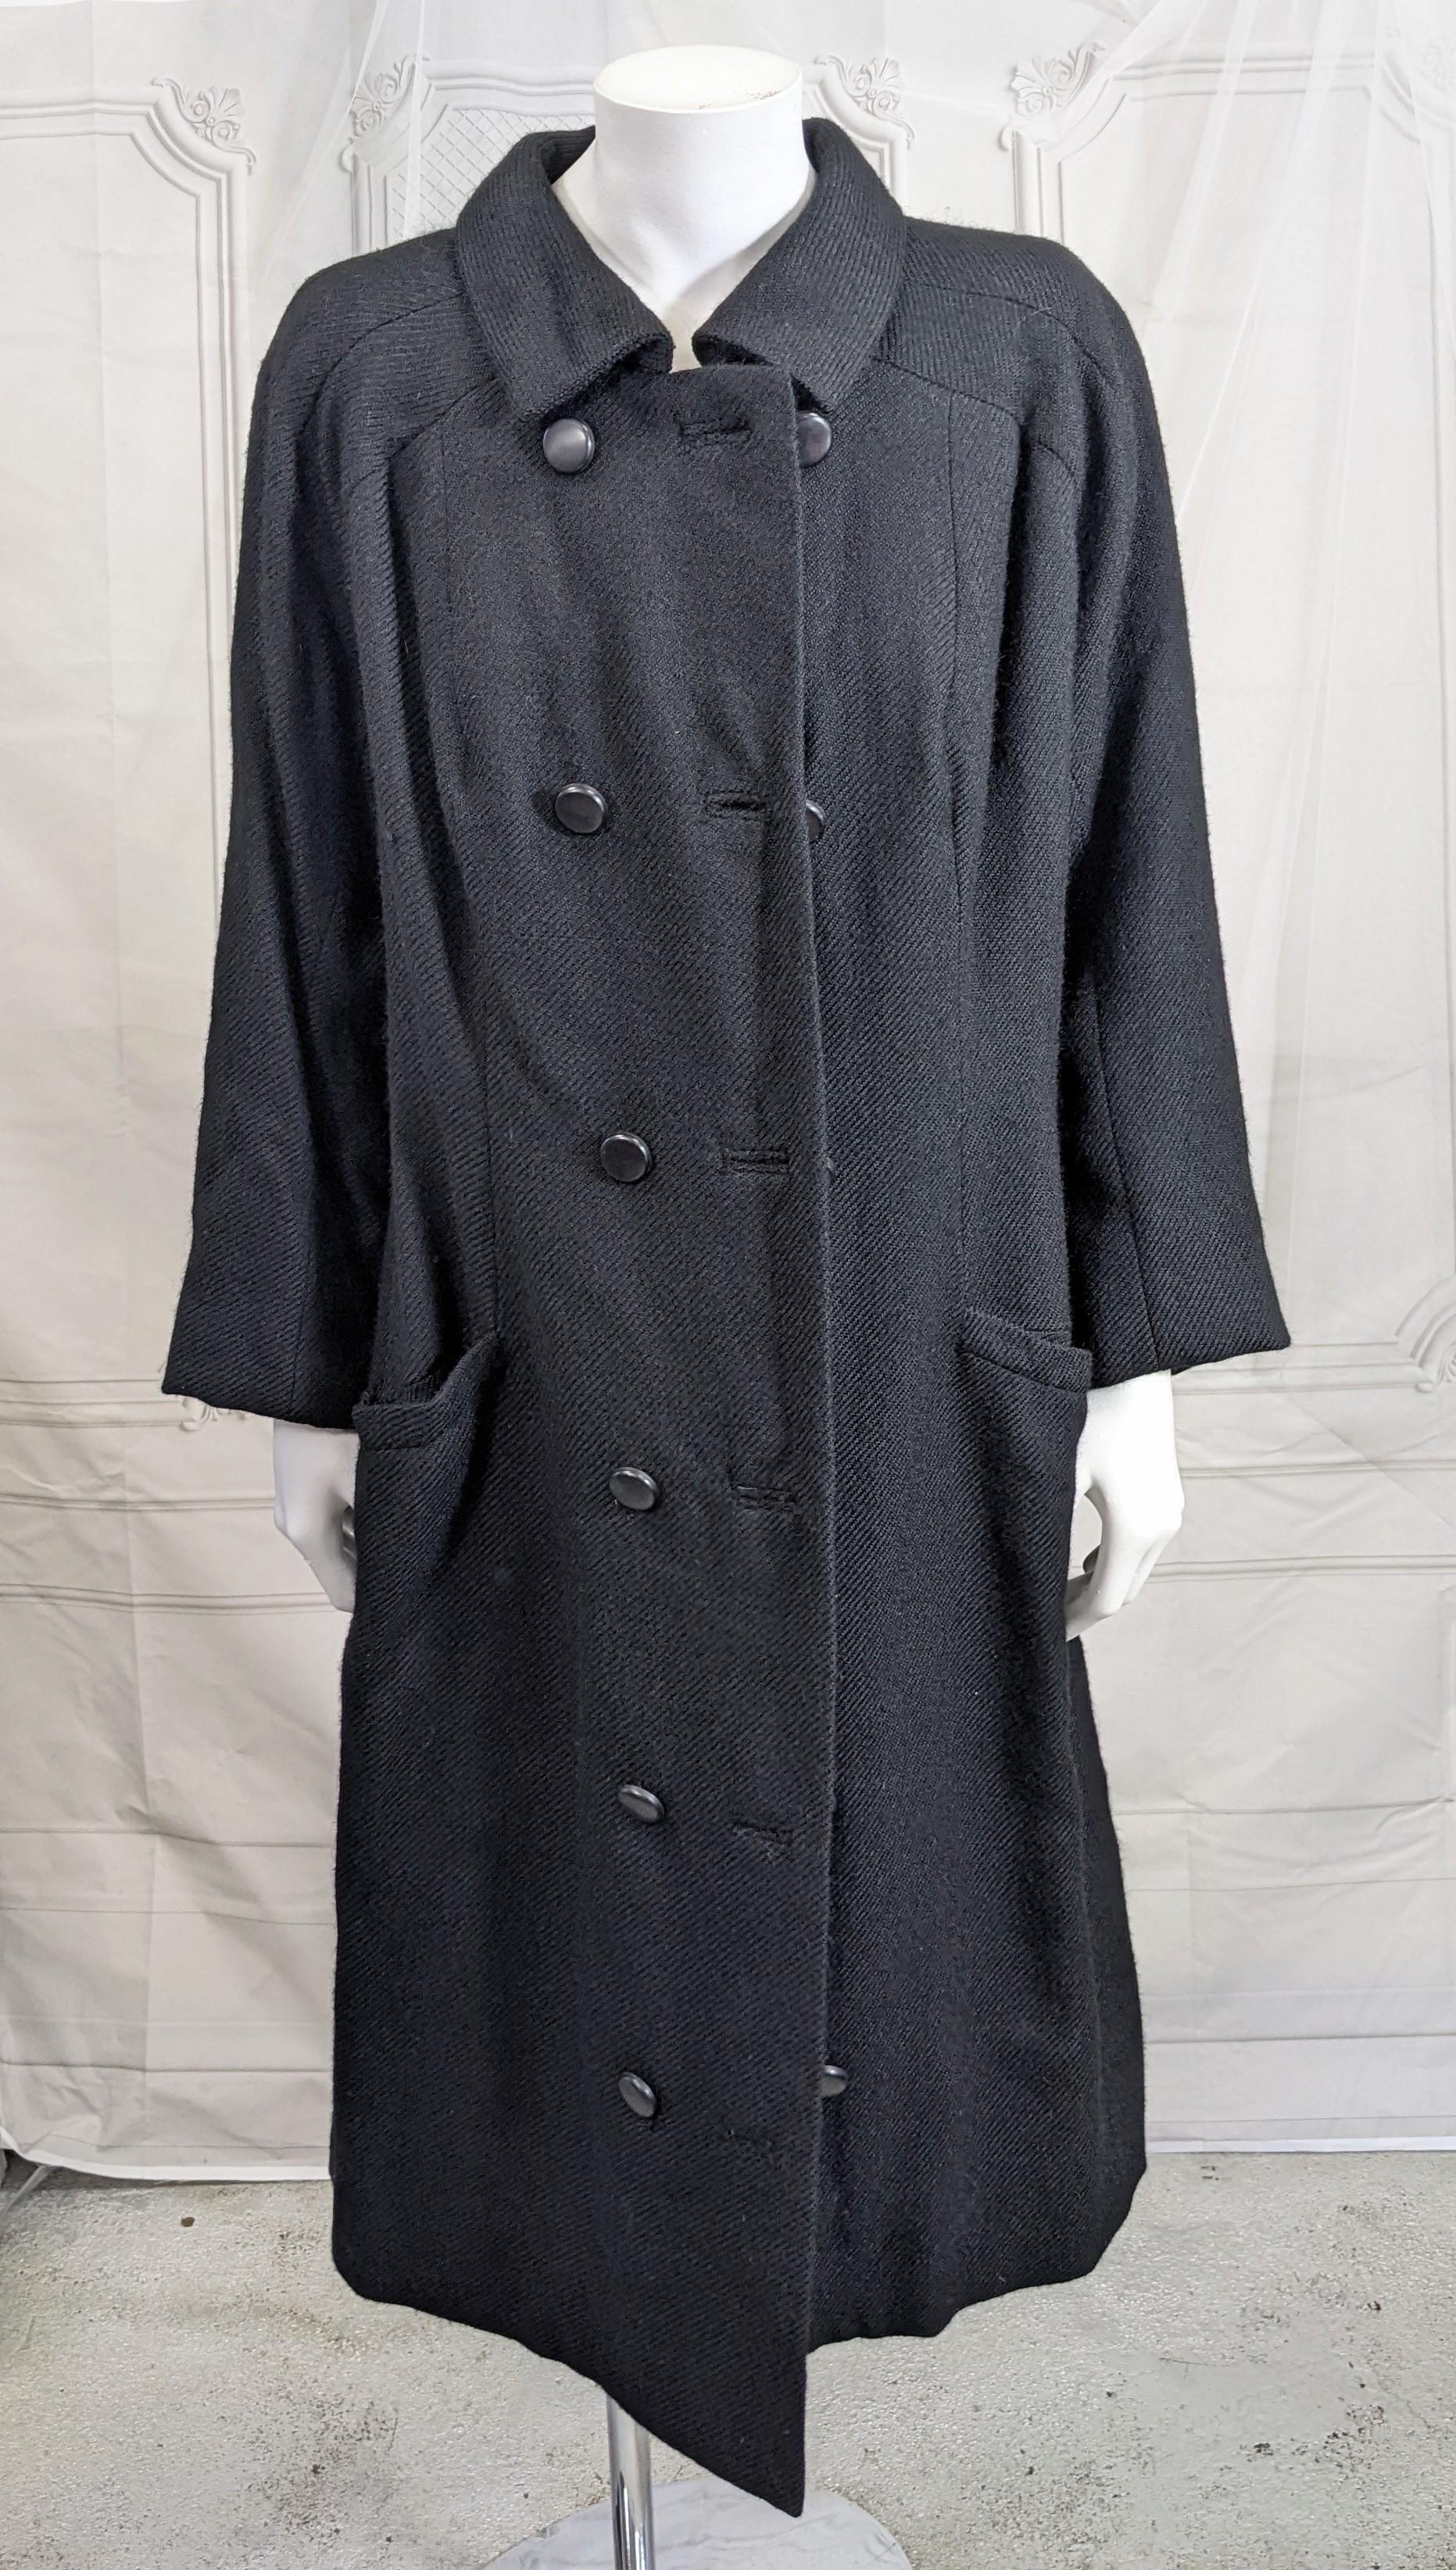 Eisa Balenciaga Haute Couture coat.  Double breasted black textured wool twill designed by Cristobal Balenciaga for Eisa dating to the early 1960's.
The semi fitted cut coat with buttons of black bakelite resin is fully lined in black silk.  Inset